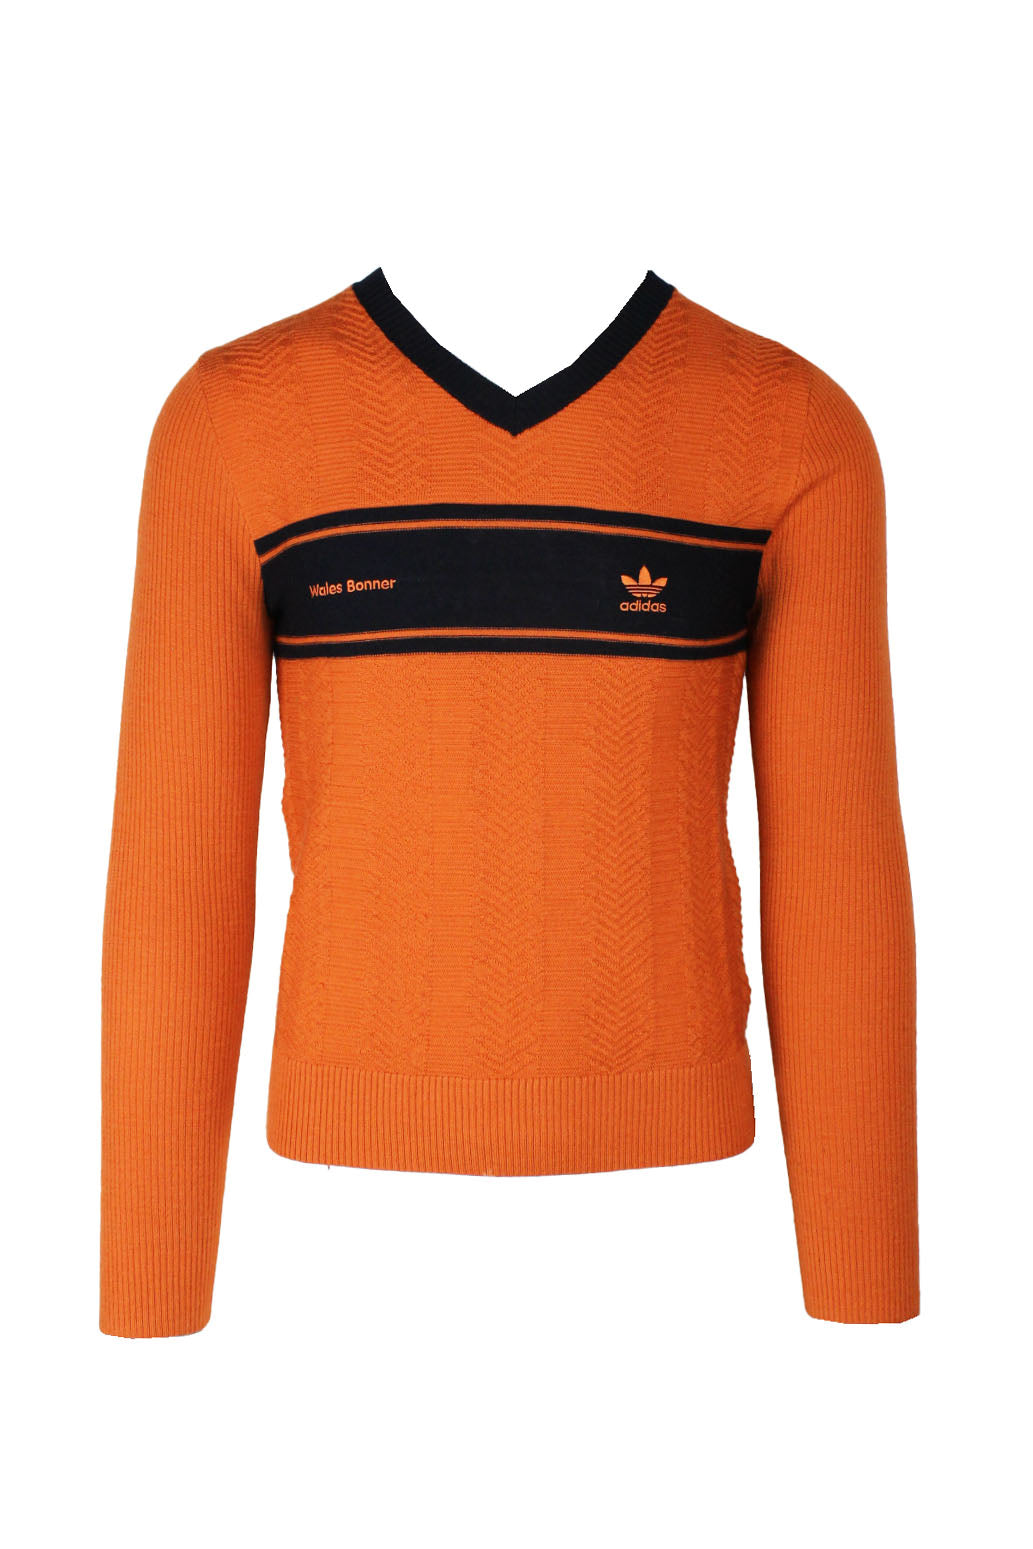 description: adidas x wales bonner orange long sleeve sweater. features black stripe with wales bonner embroidery at front, black hem v neckline, and ribbed knit throughout. 